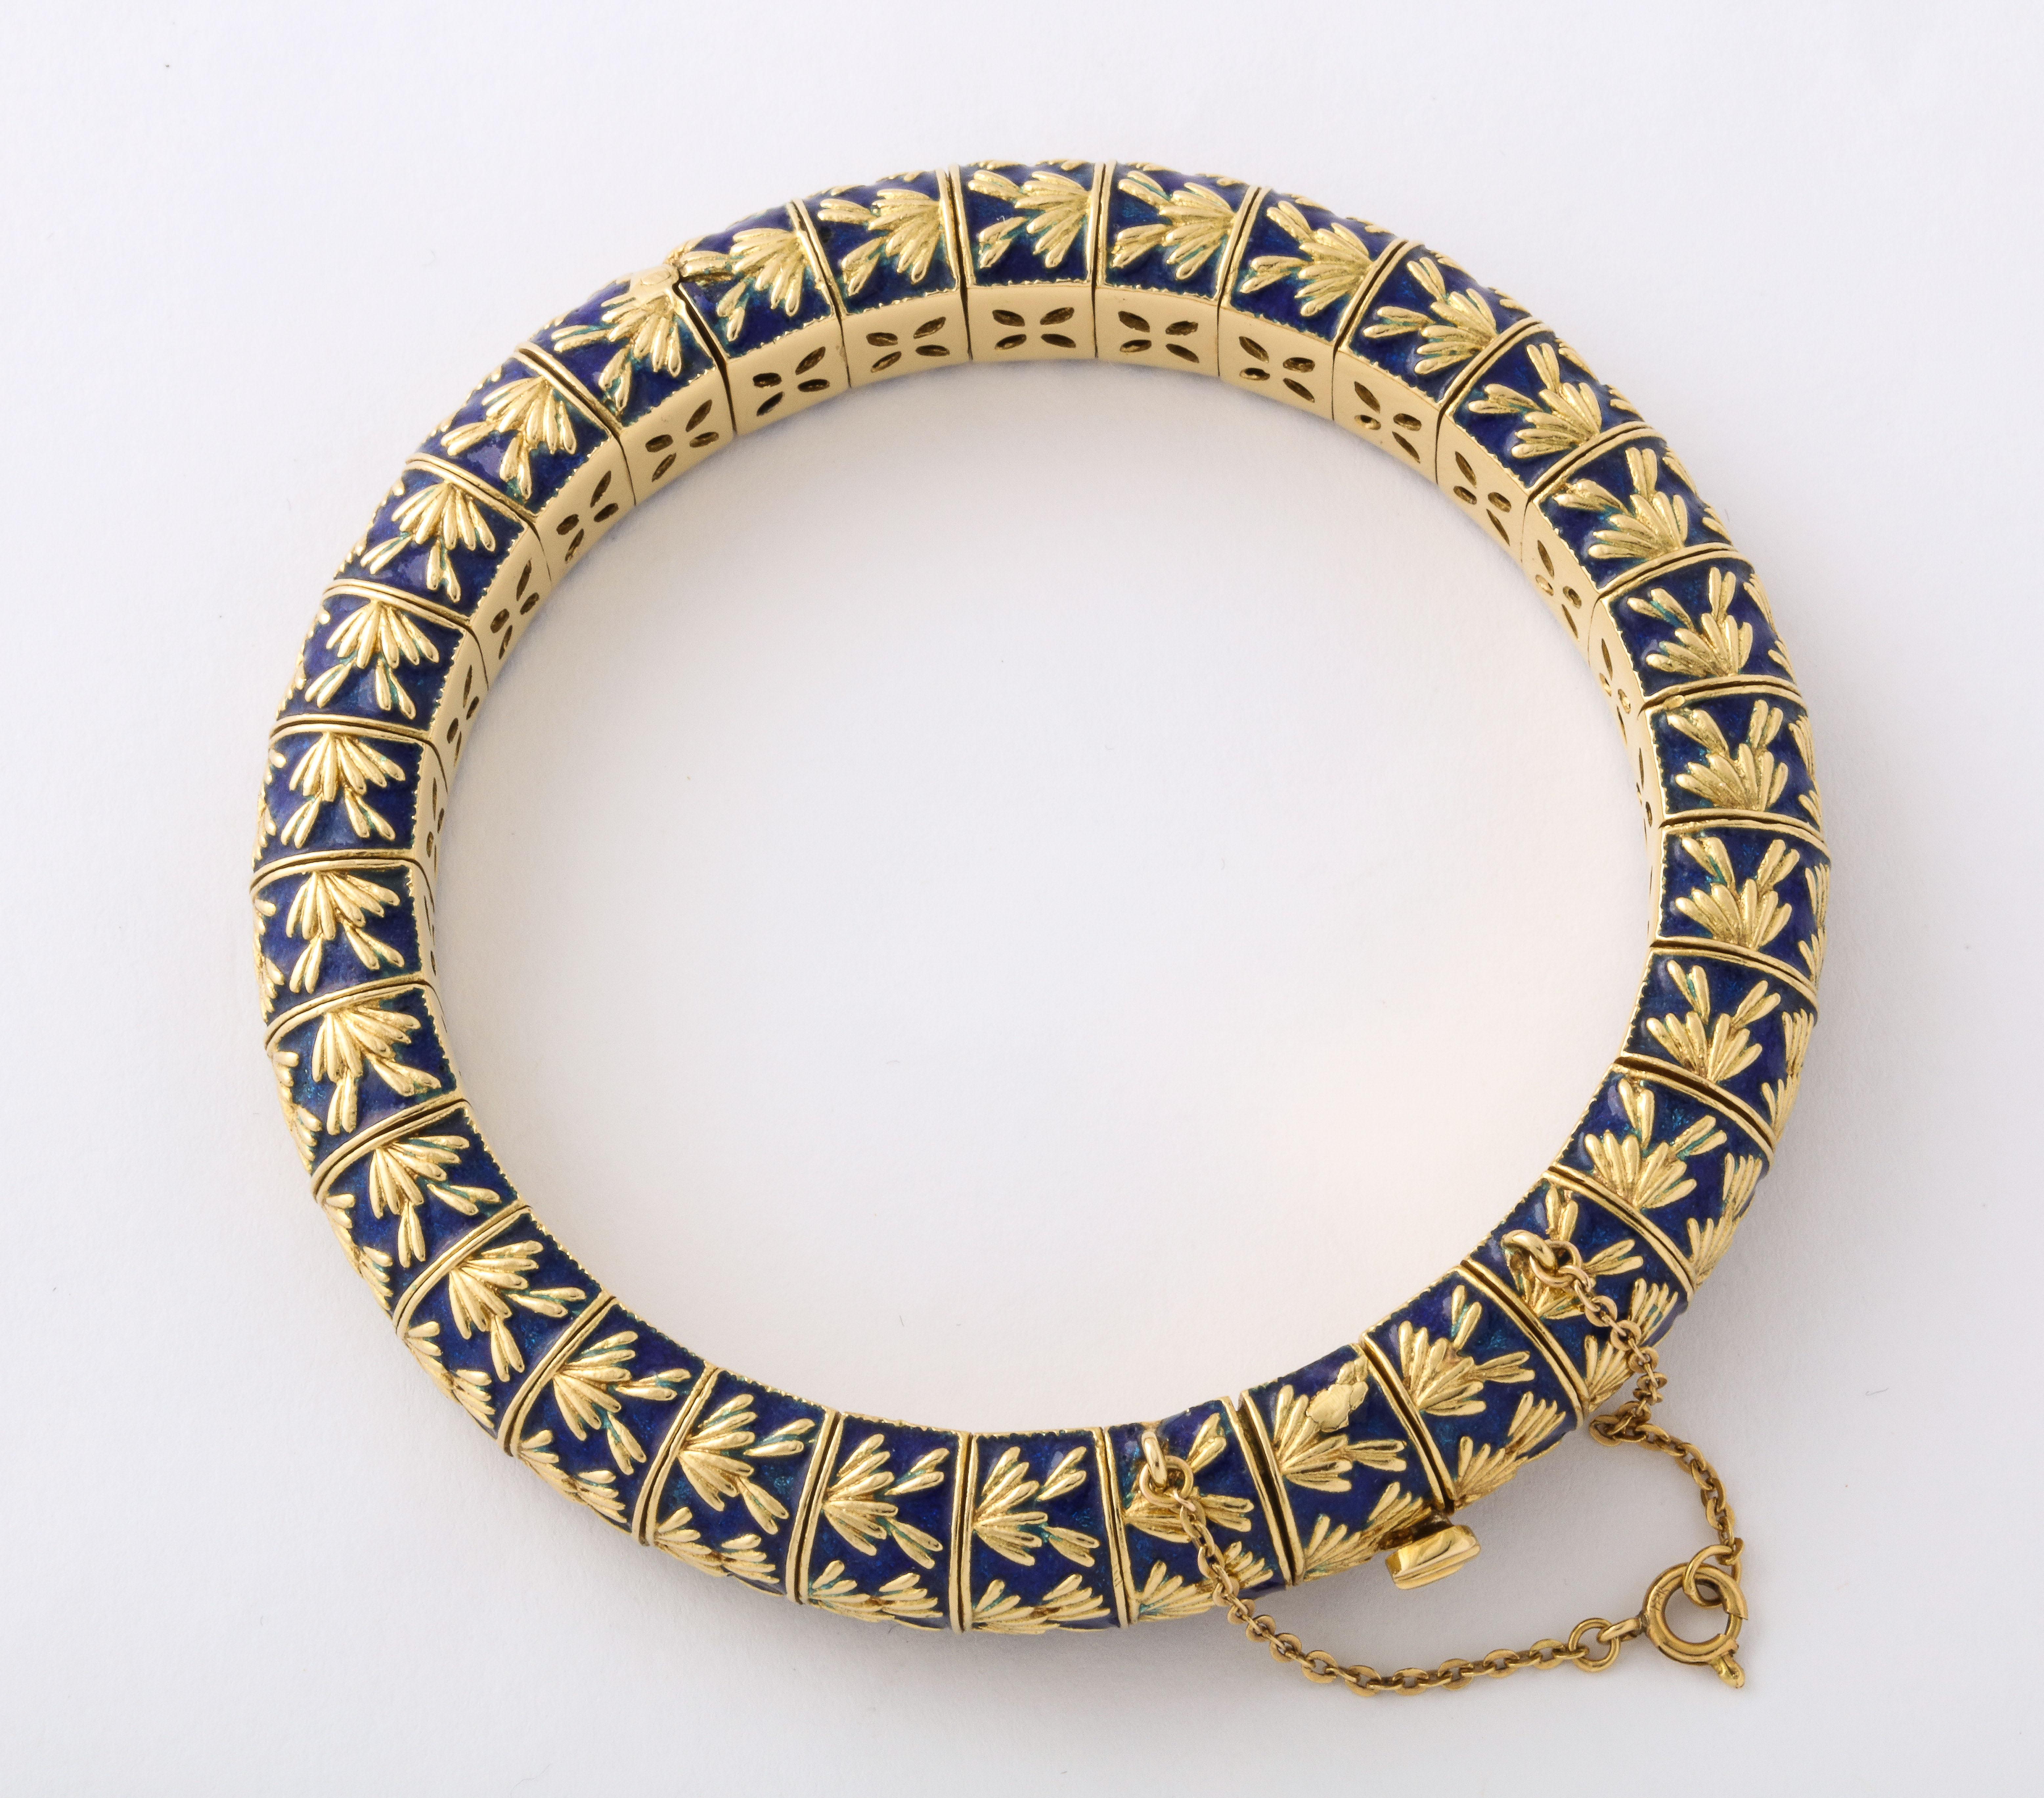 We offer a perfectly elegant 1970s Tiffany & Co. Paris bangle bracelet of 18K gold segments with rich blue enameled details with a slight flexibility and hinged for easy on and off with a safety latch and safety chain. Wear it stacked or fashionably